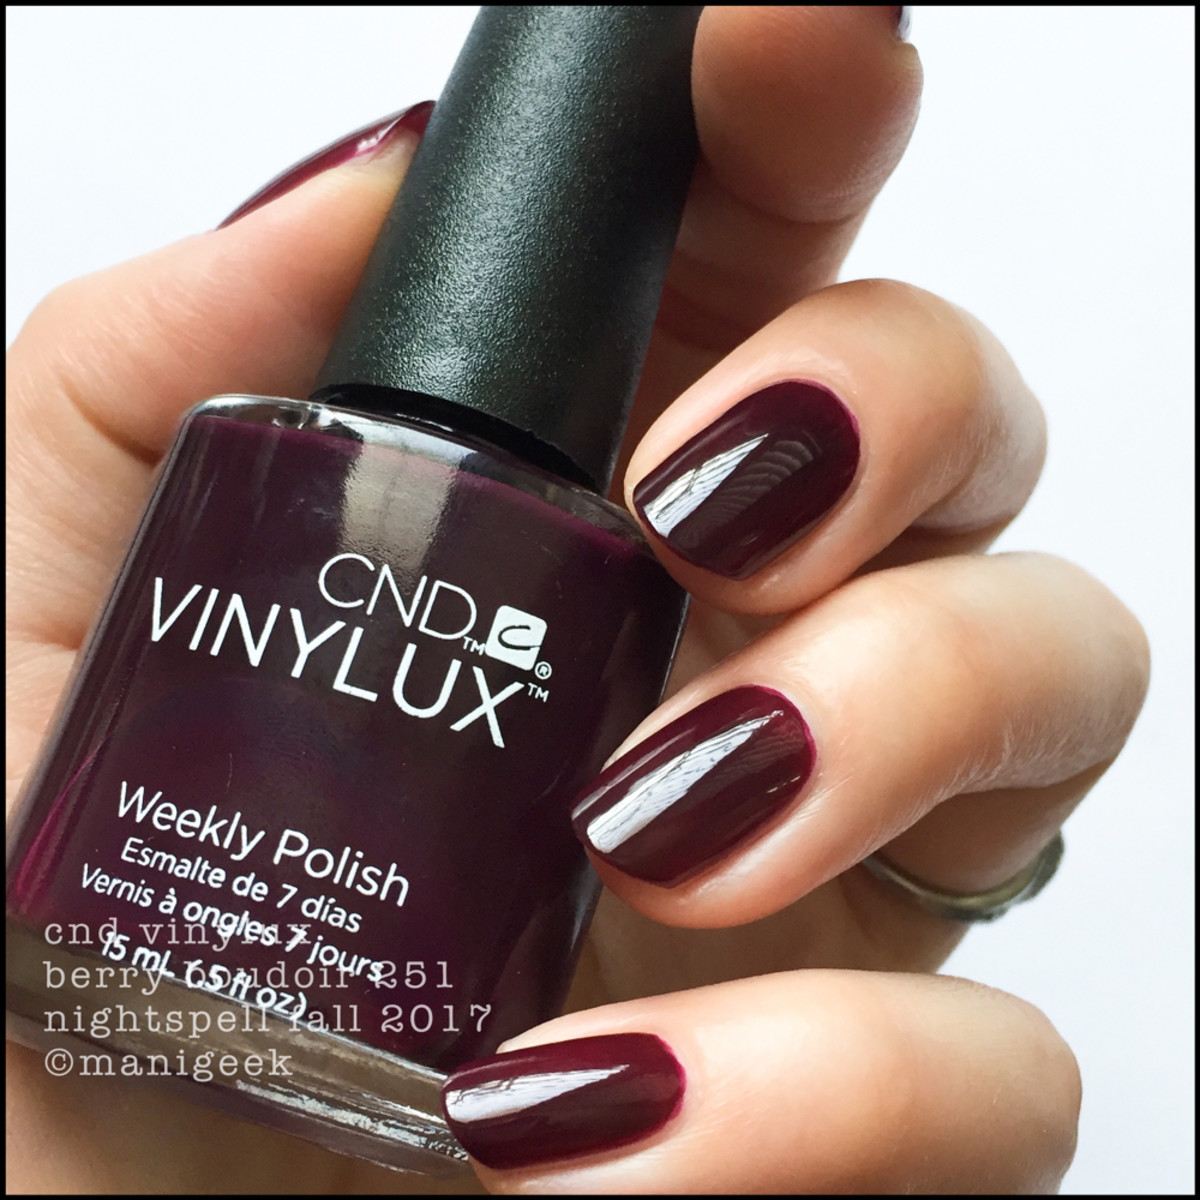 CND Vinylux Berry Boudoir - CND Vinylux Nightspell Fall 2017 Collection Swatches